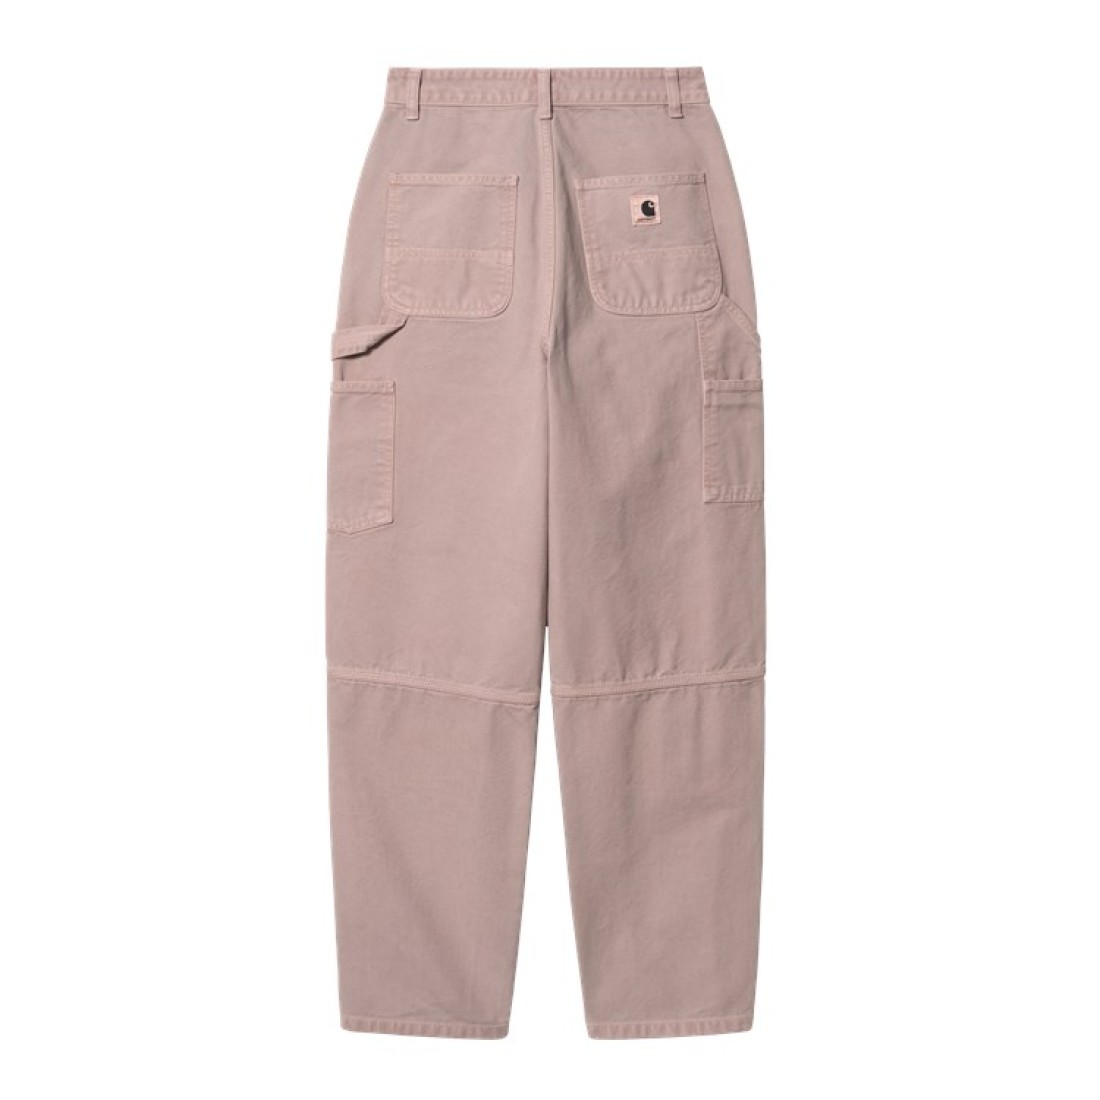 W' Amherst Pant Lupinus Faded Carhartt WIP